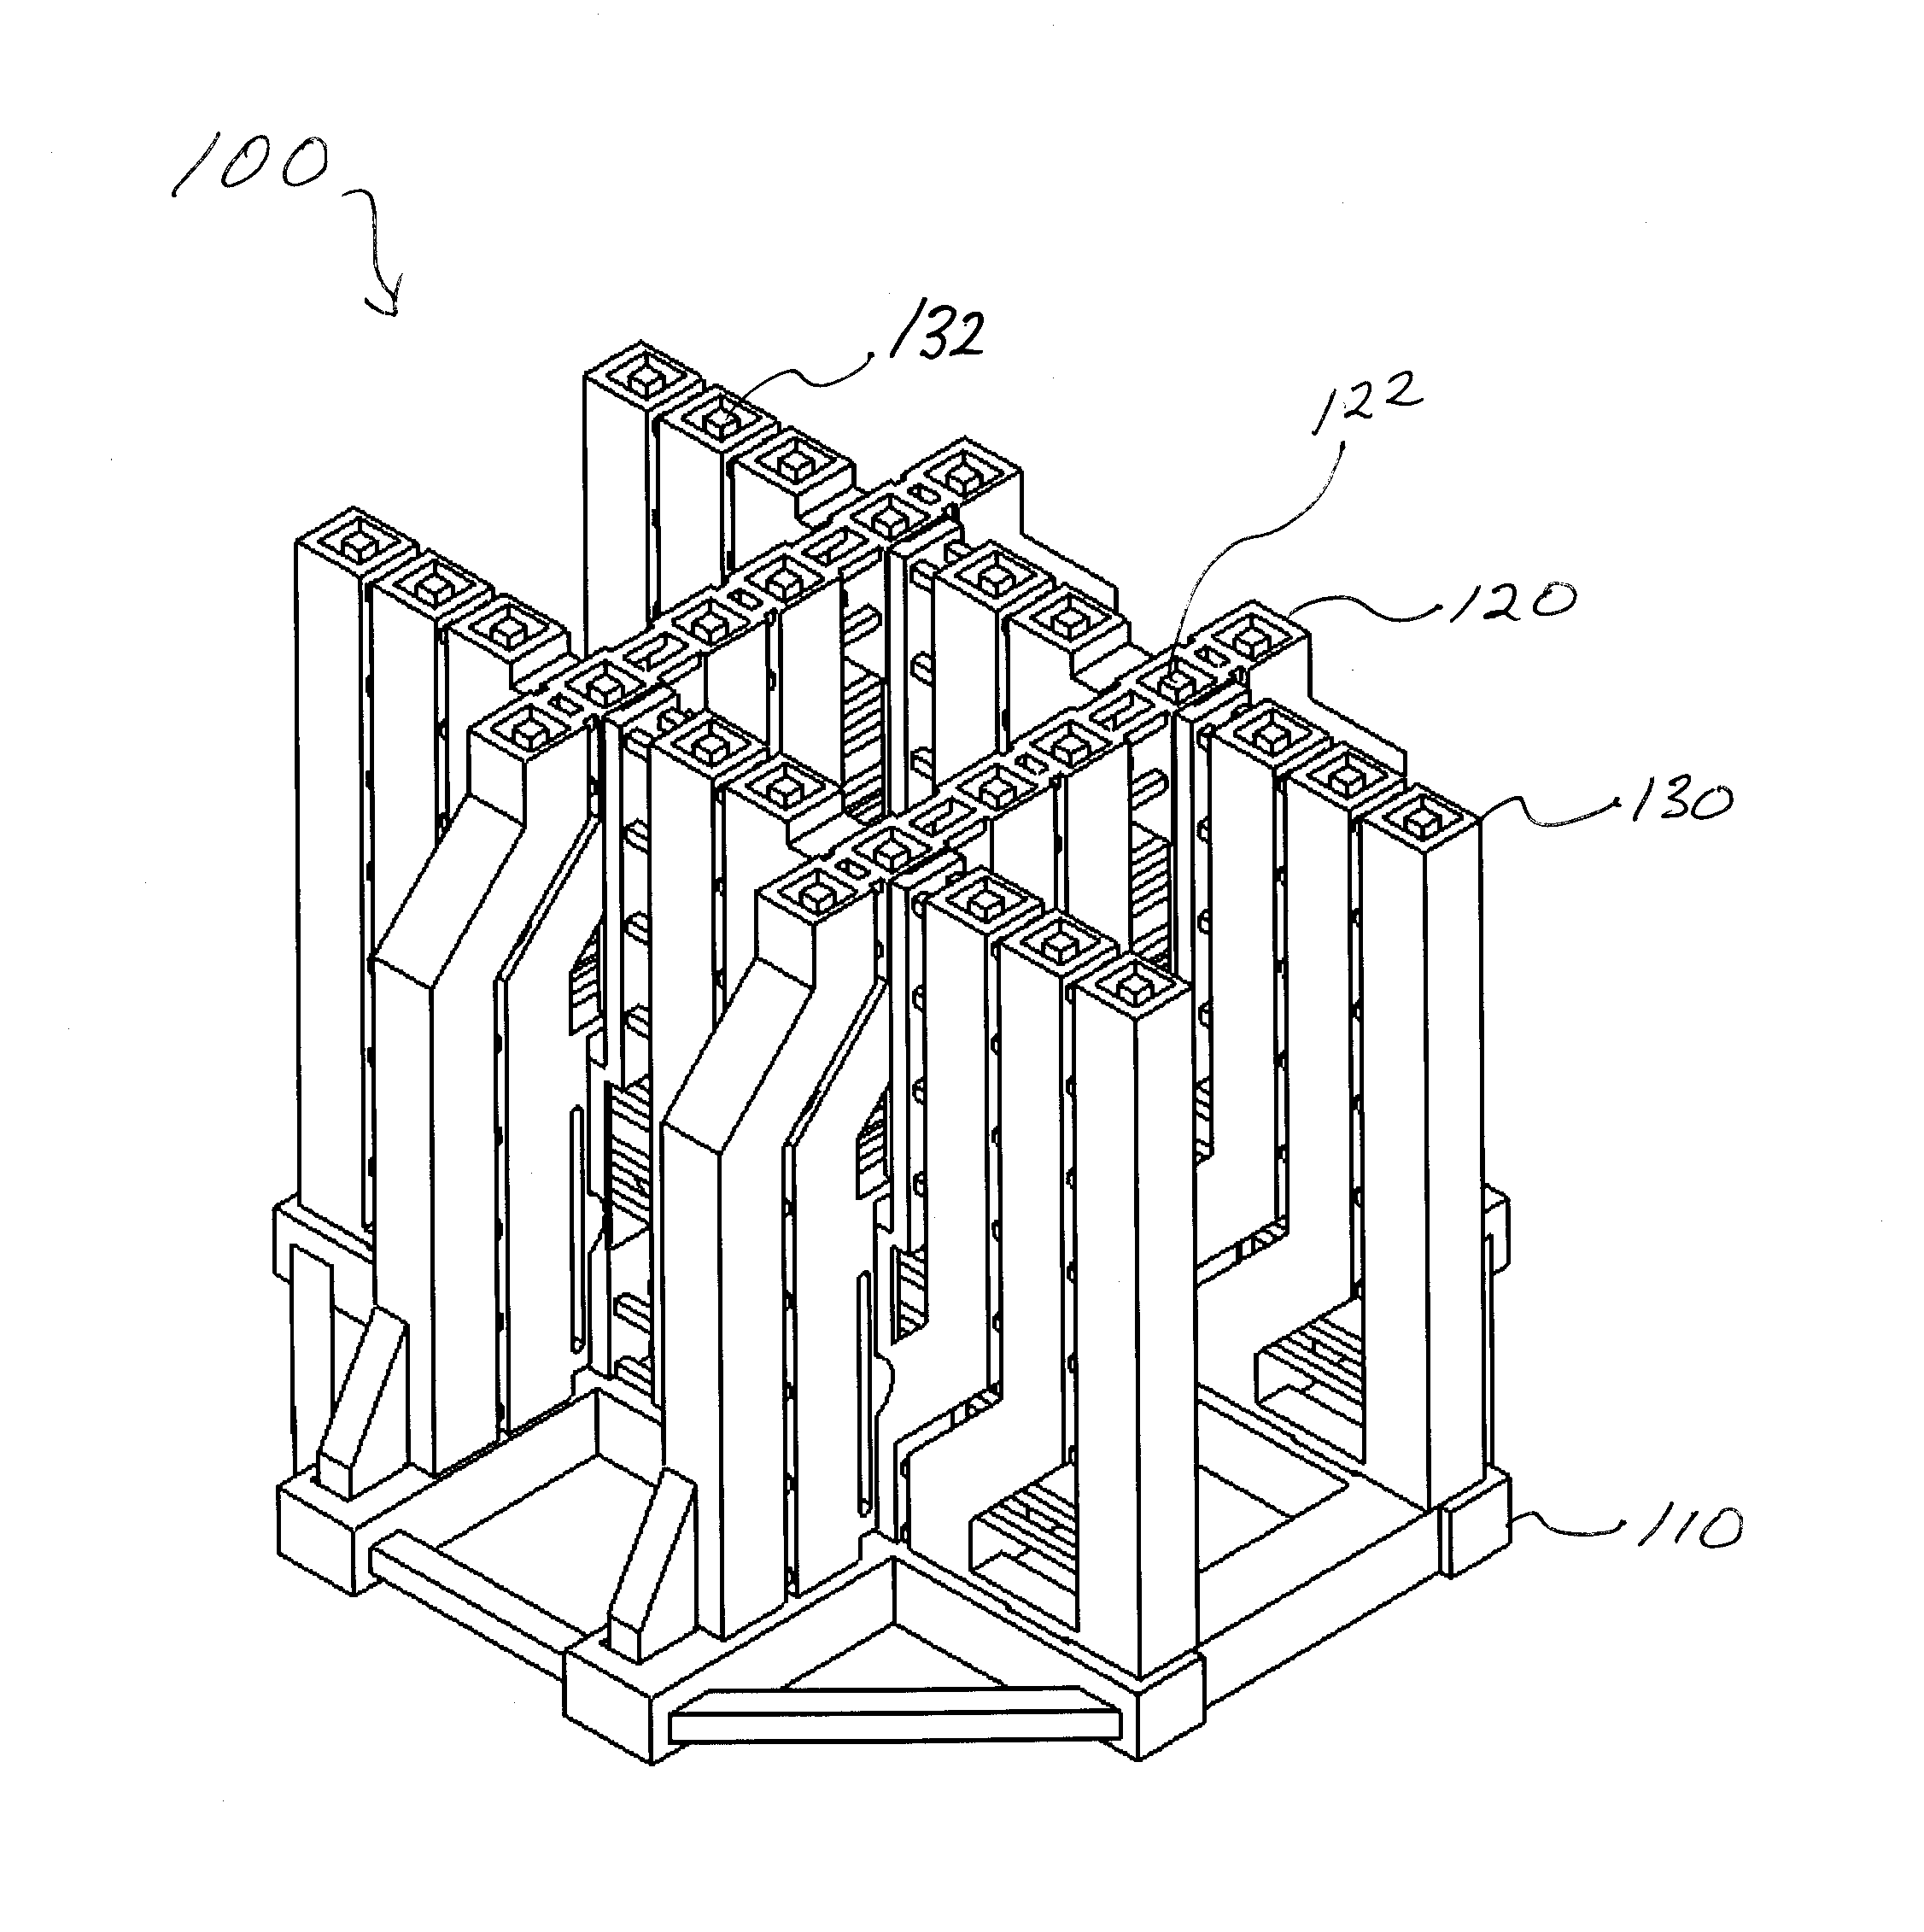 Substrate-free interconnected electronic mechanical structural systems